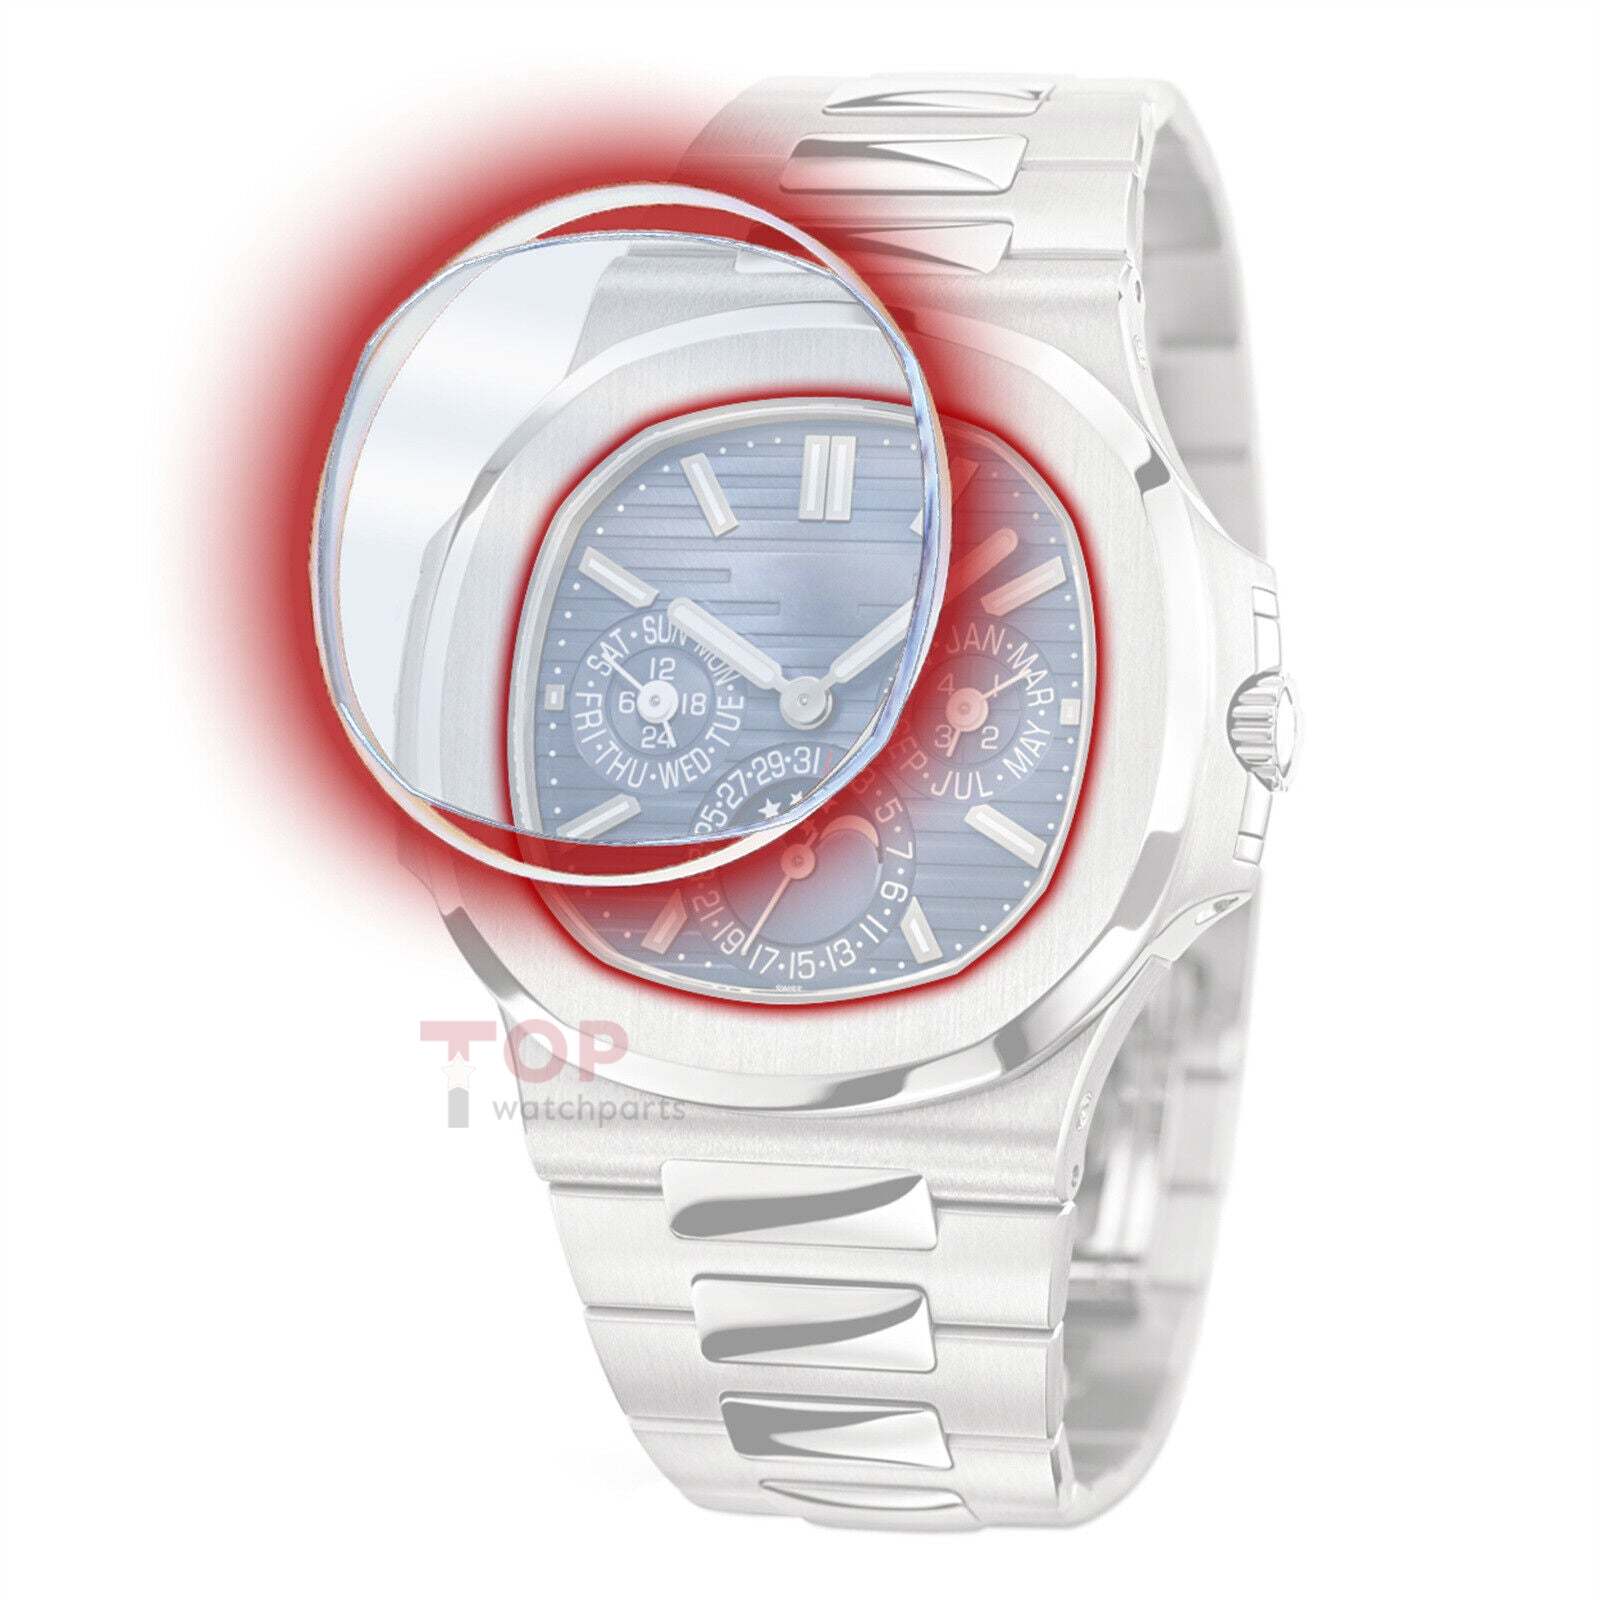 Watch Crystal for Patek Philippe 5740 Nautilus Sapphire Glass